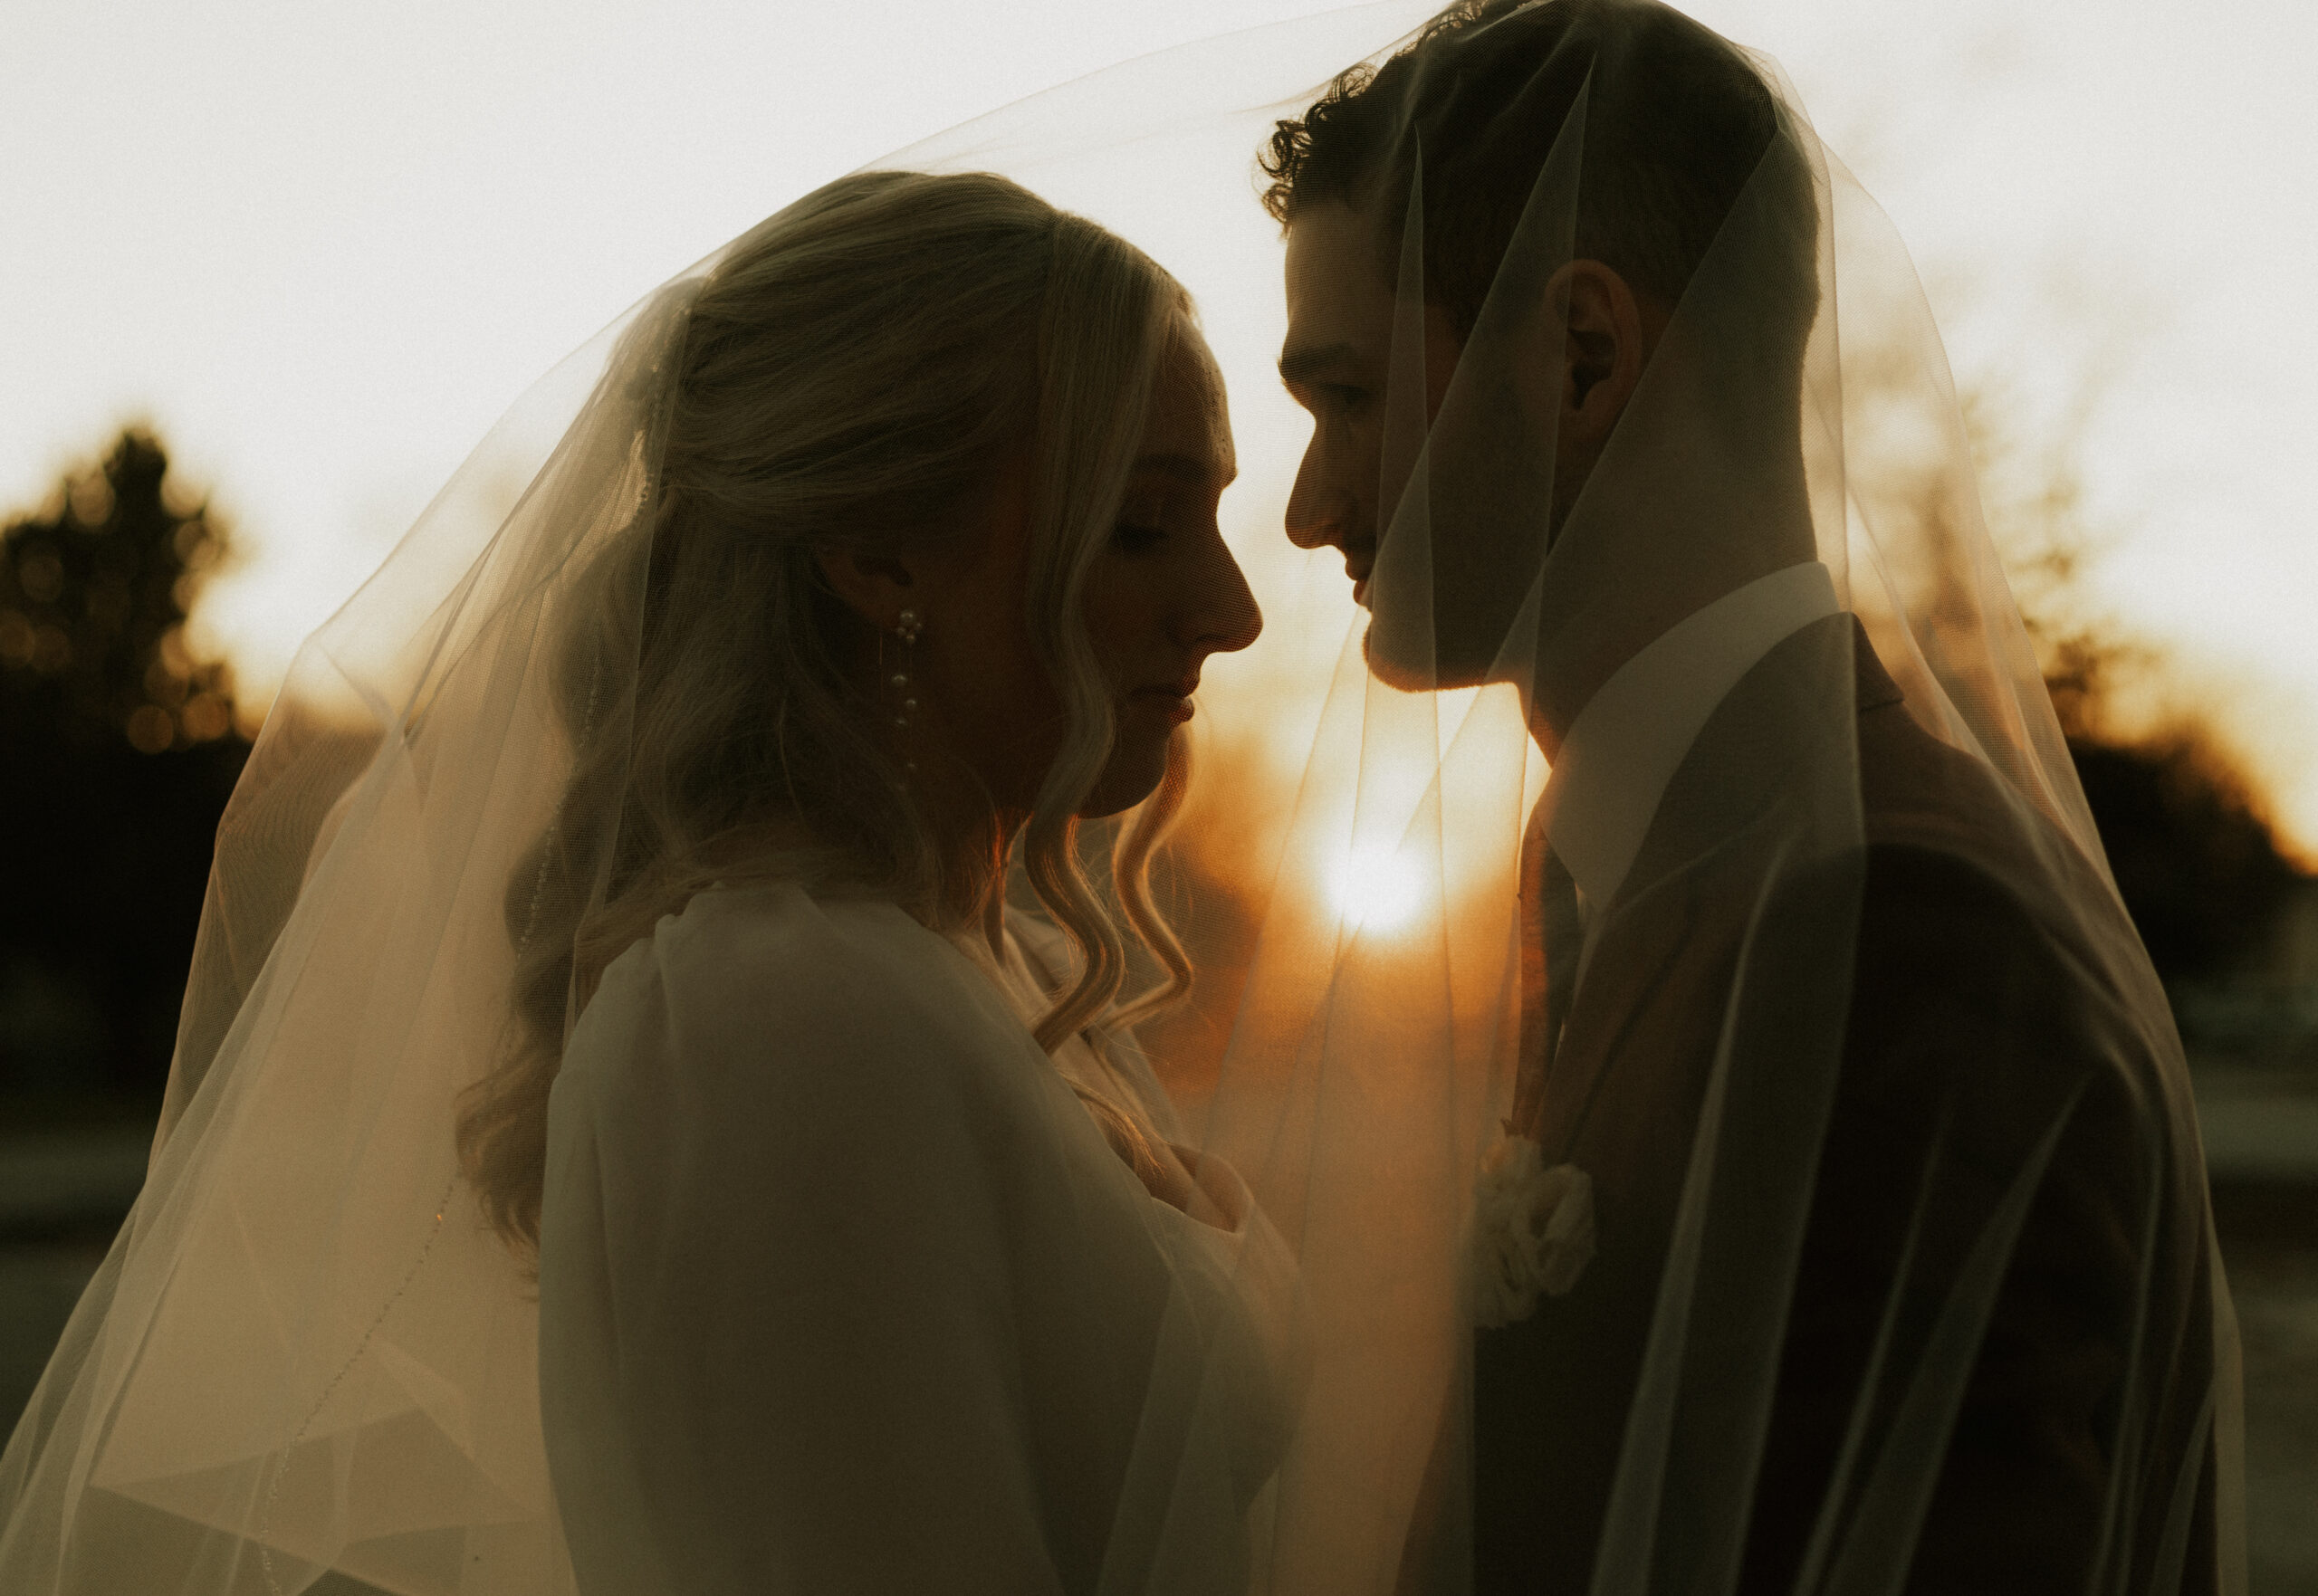 wedding bride and groom underneath veil during golden hour, with sun shining through veil about to kiss